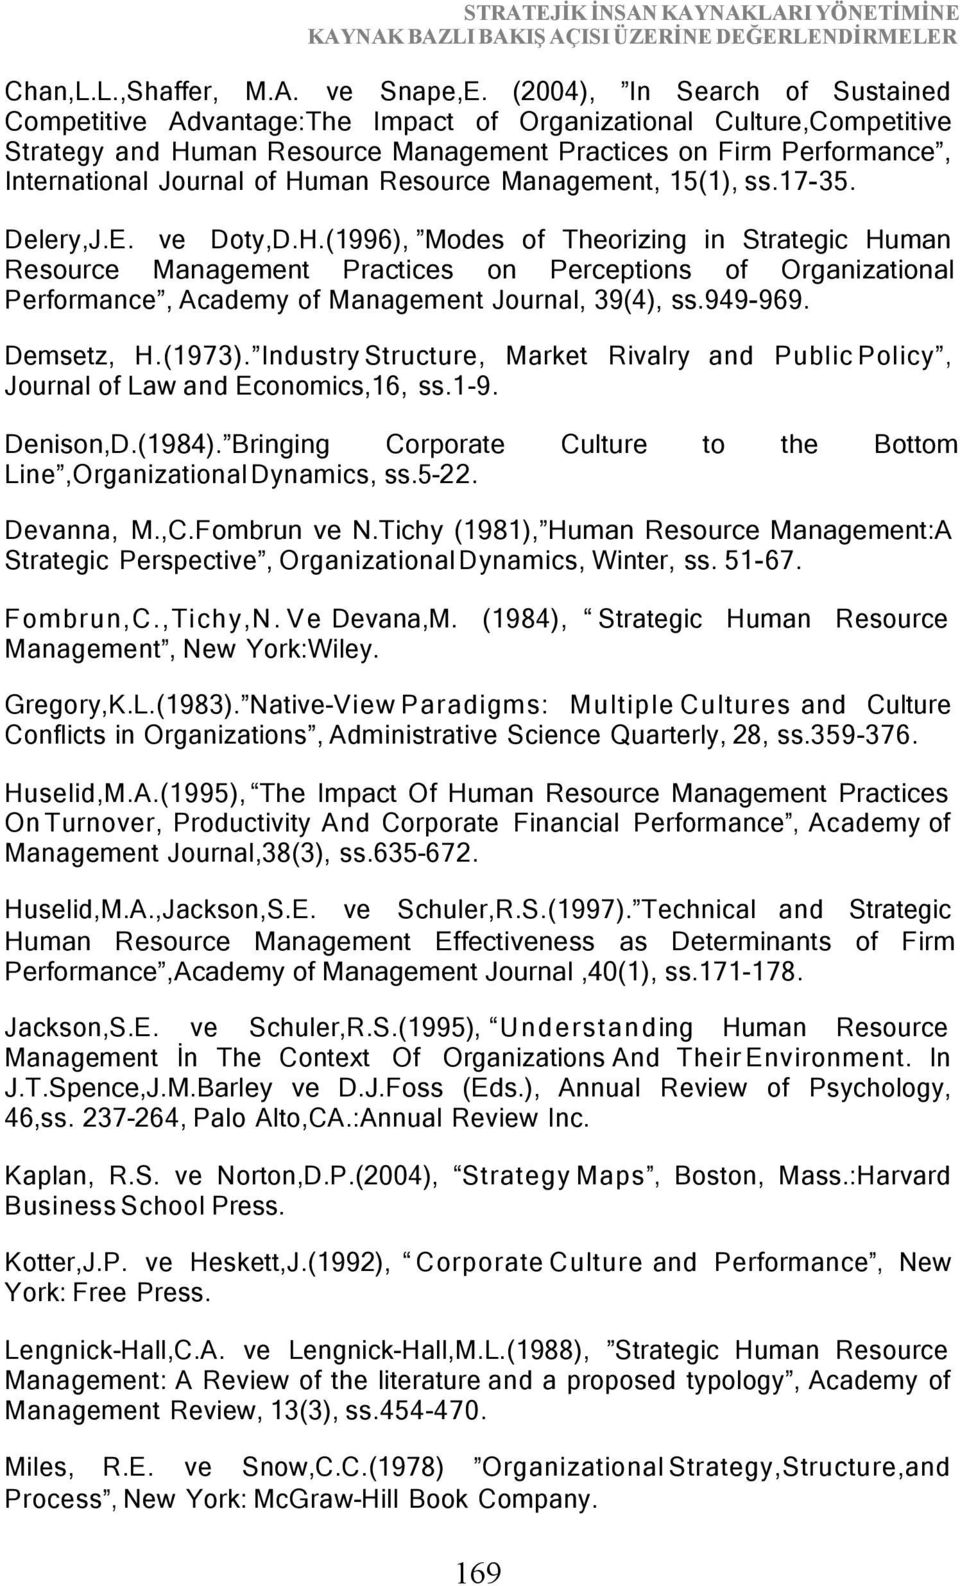 Human Resource Management, 15(1), ss.17-35. Delery,J.E. ve Doty,D.H.(1996), Modes of Theorizing in Strategic Human Resource Management Practices on Perceptions of Organizational Performance, Academy of Management Journal, 39(4), ss.